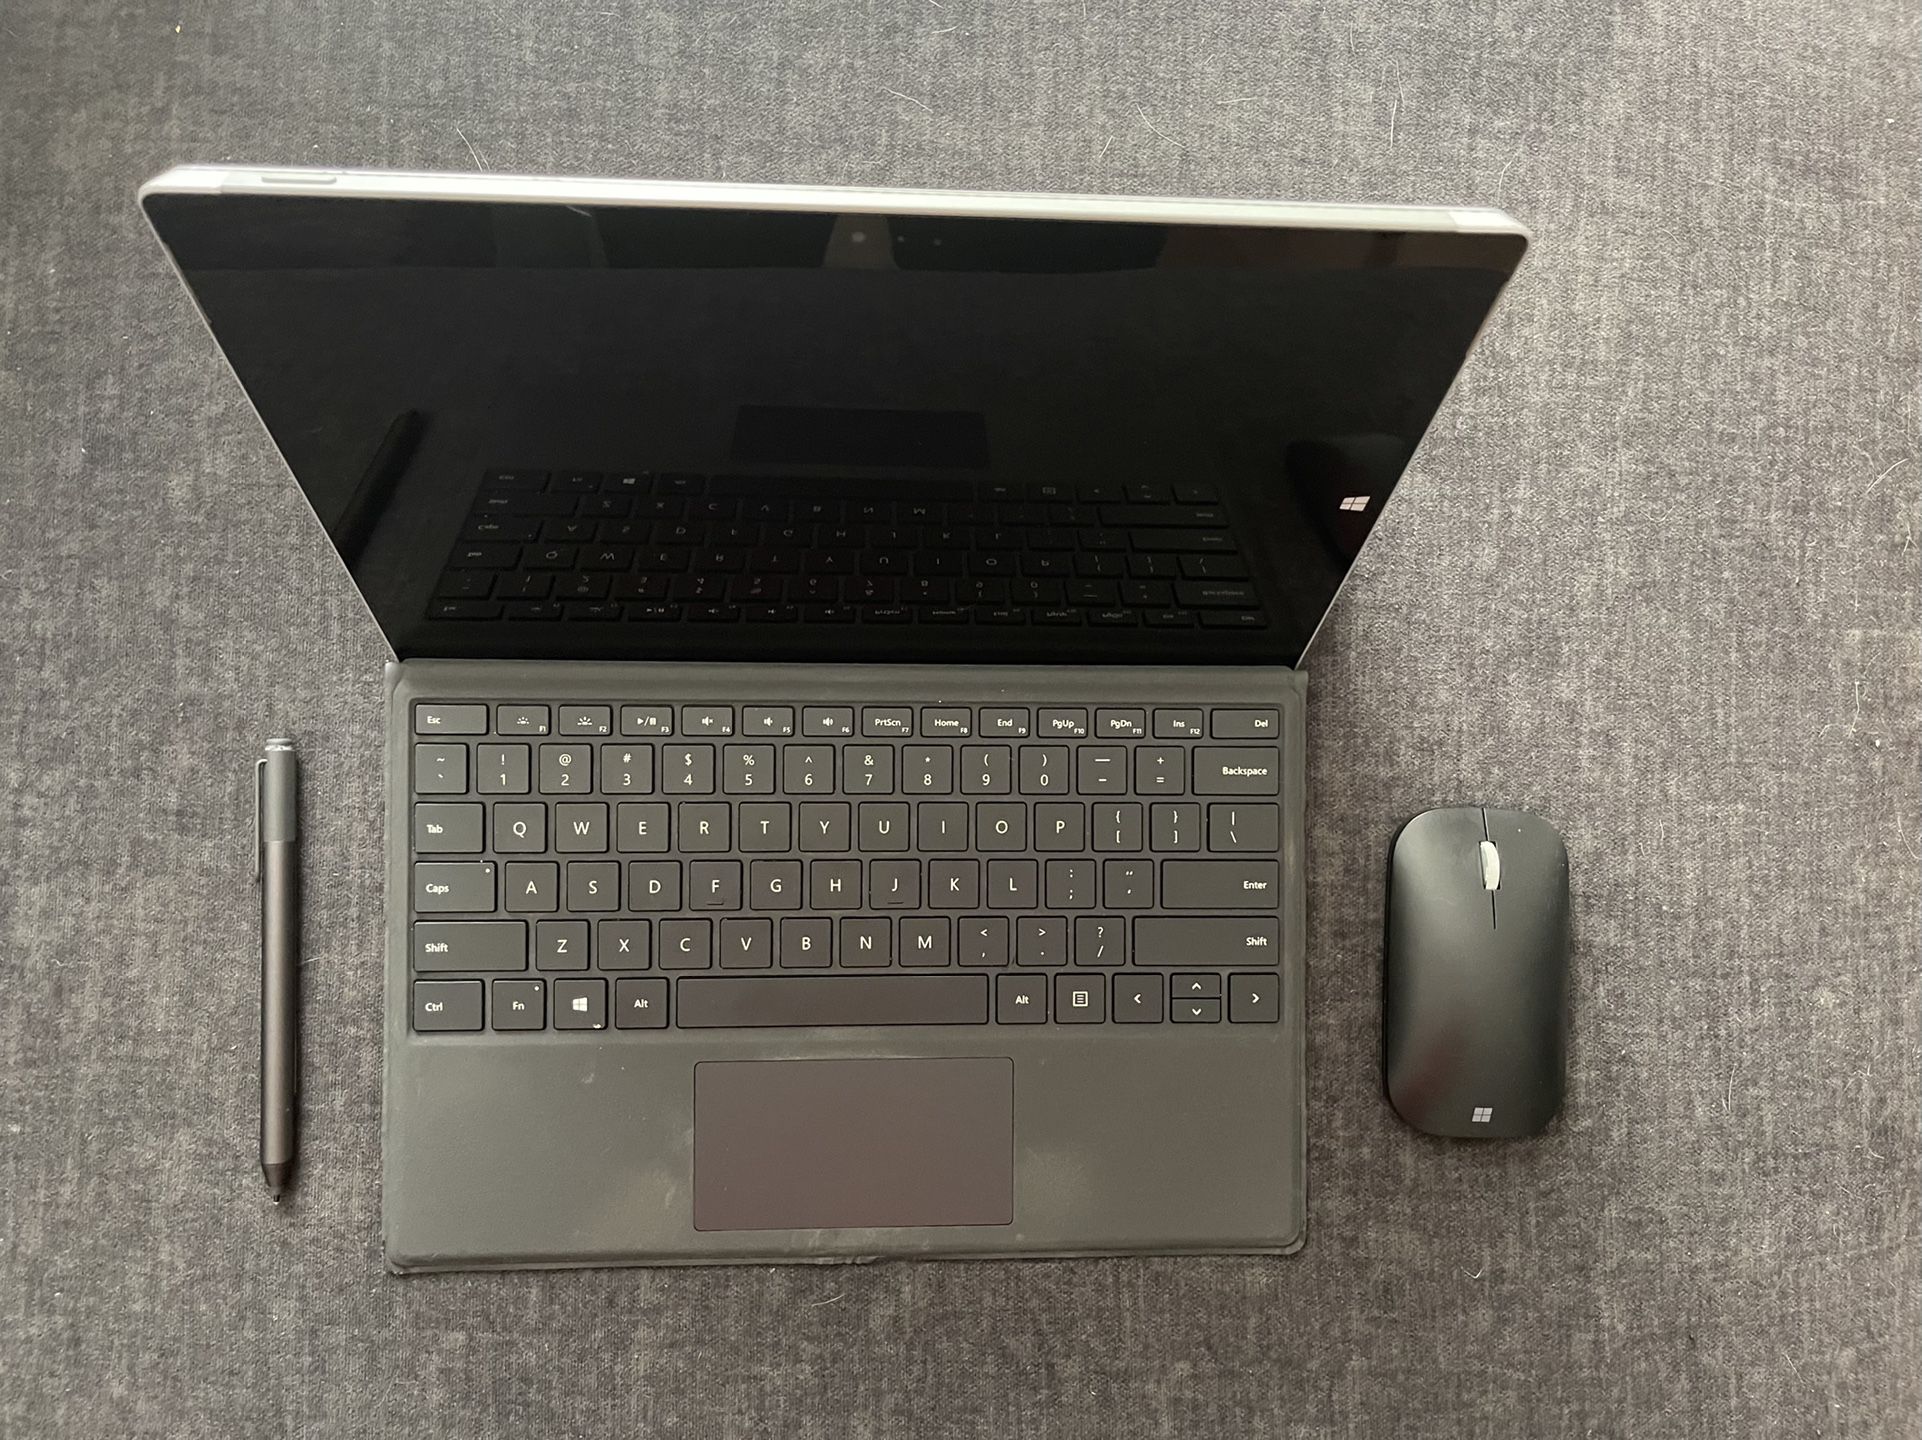 Surface Pro 3 with Keyboard, Mouse, & Surface Pen